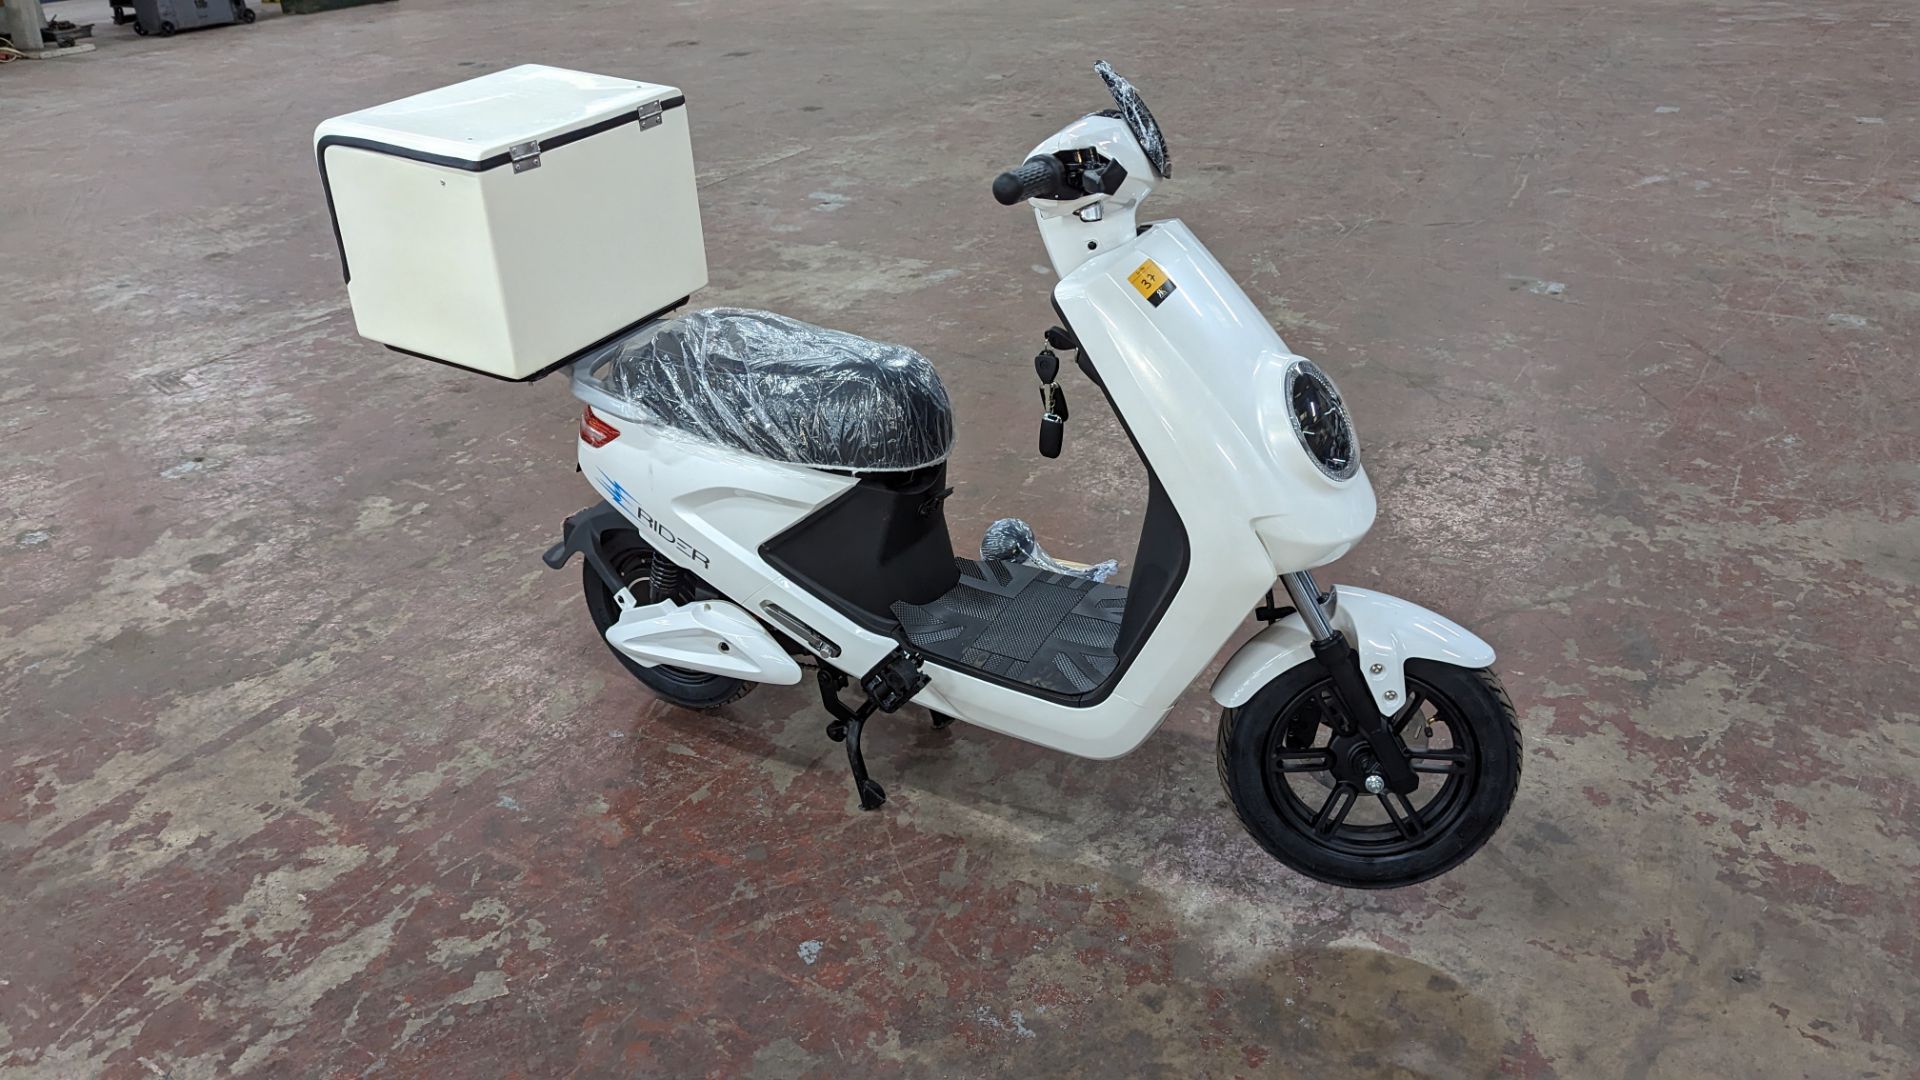 Model 18 Electric Bike: Zero (0) recorded miles, white body with black detailing, insulated box moun - Image 6 of 12